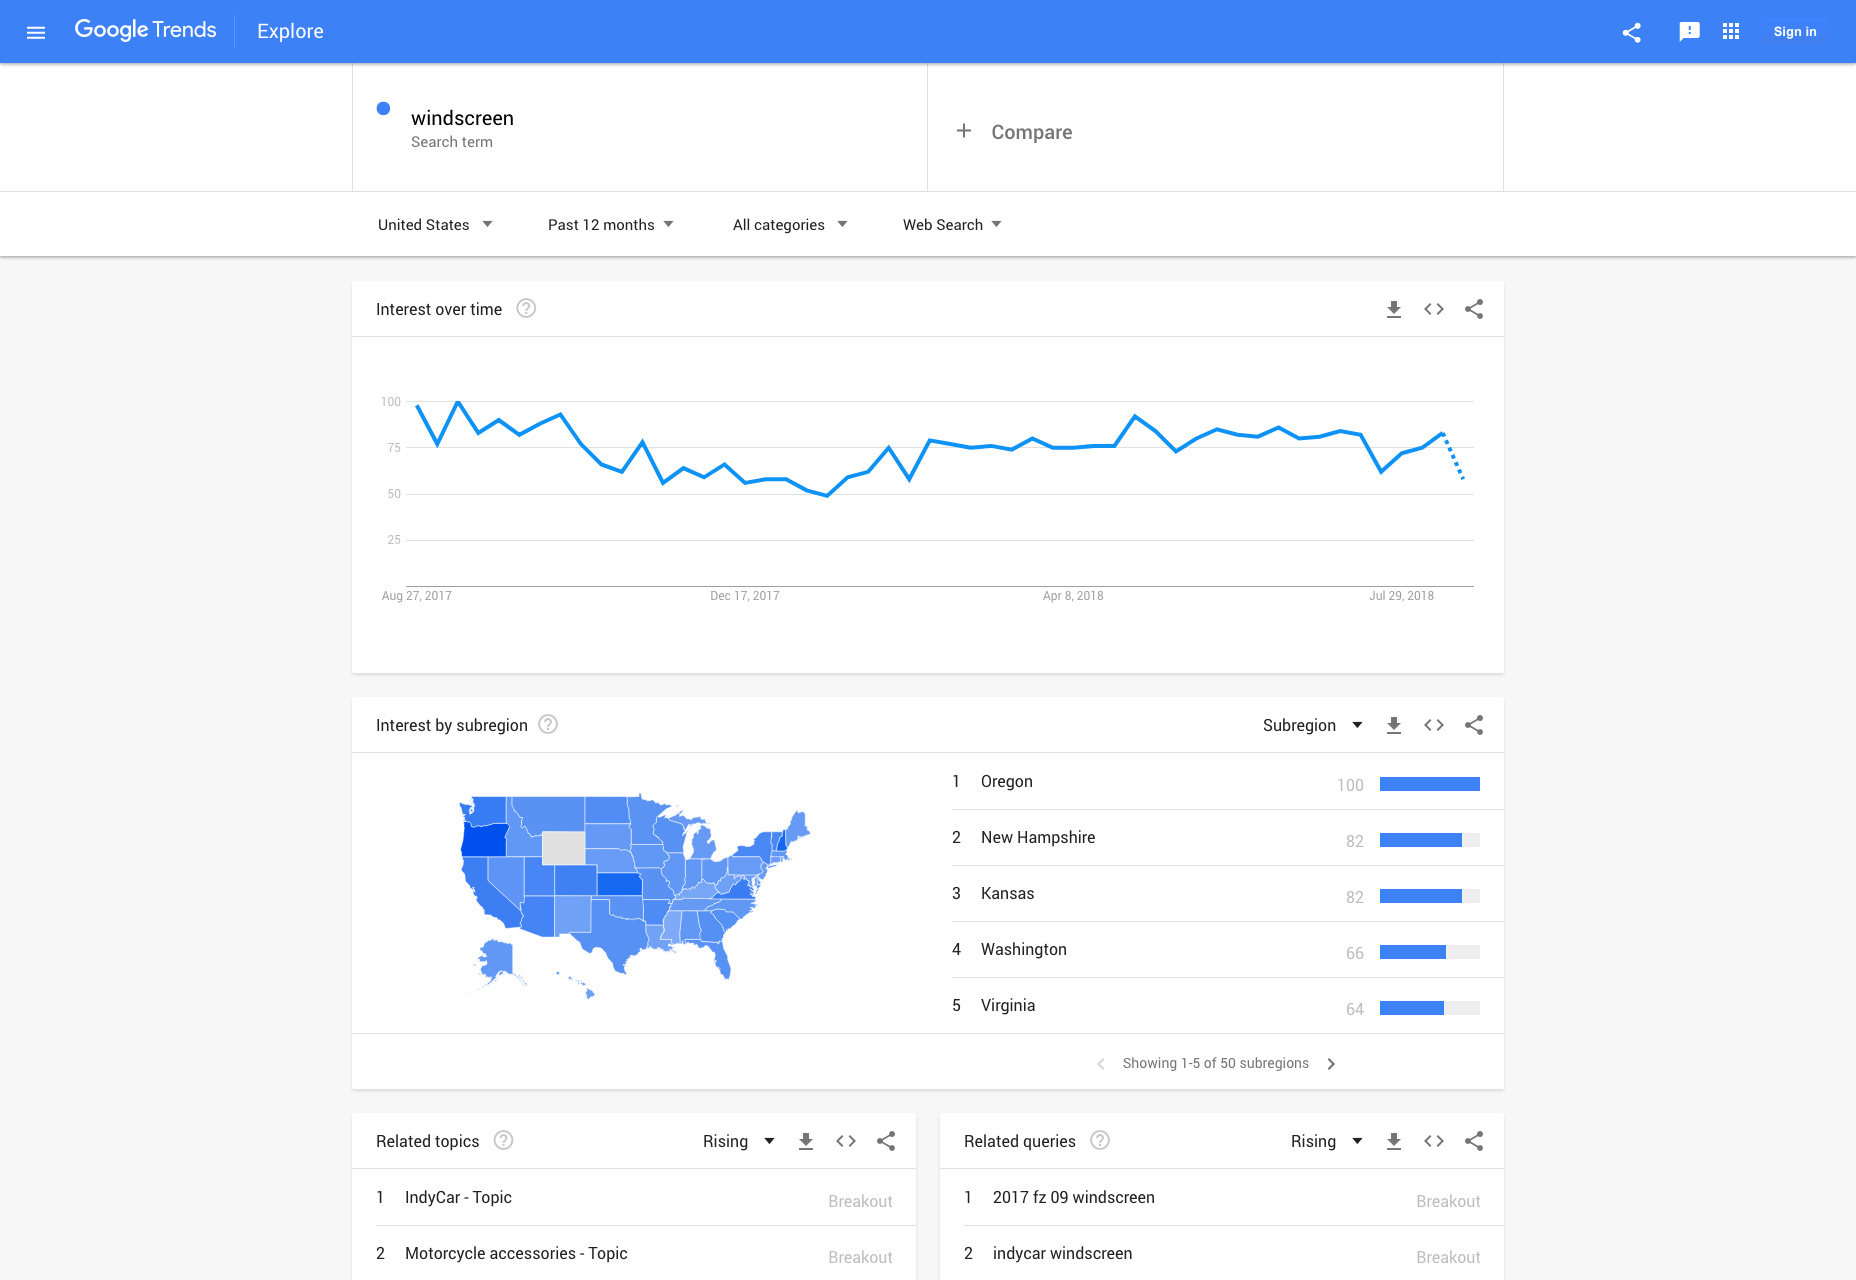 Google trends is a great tool to validate